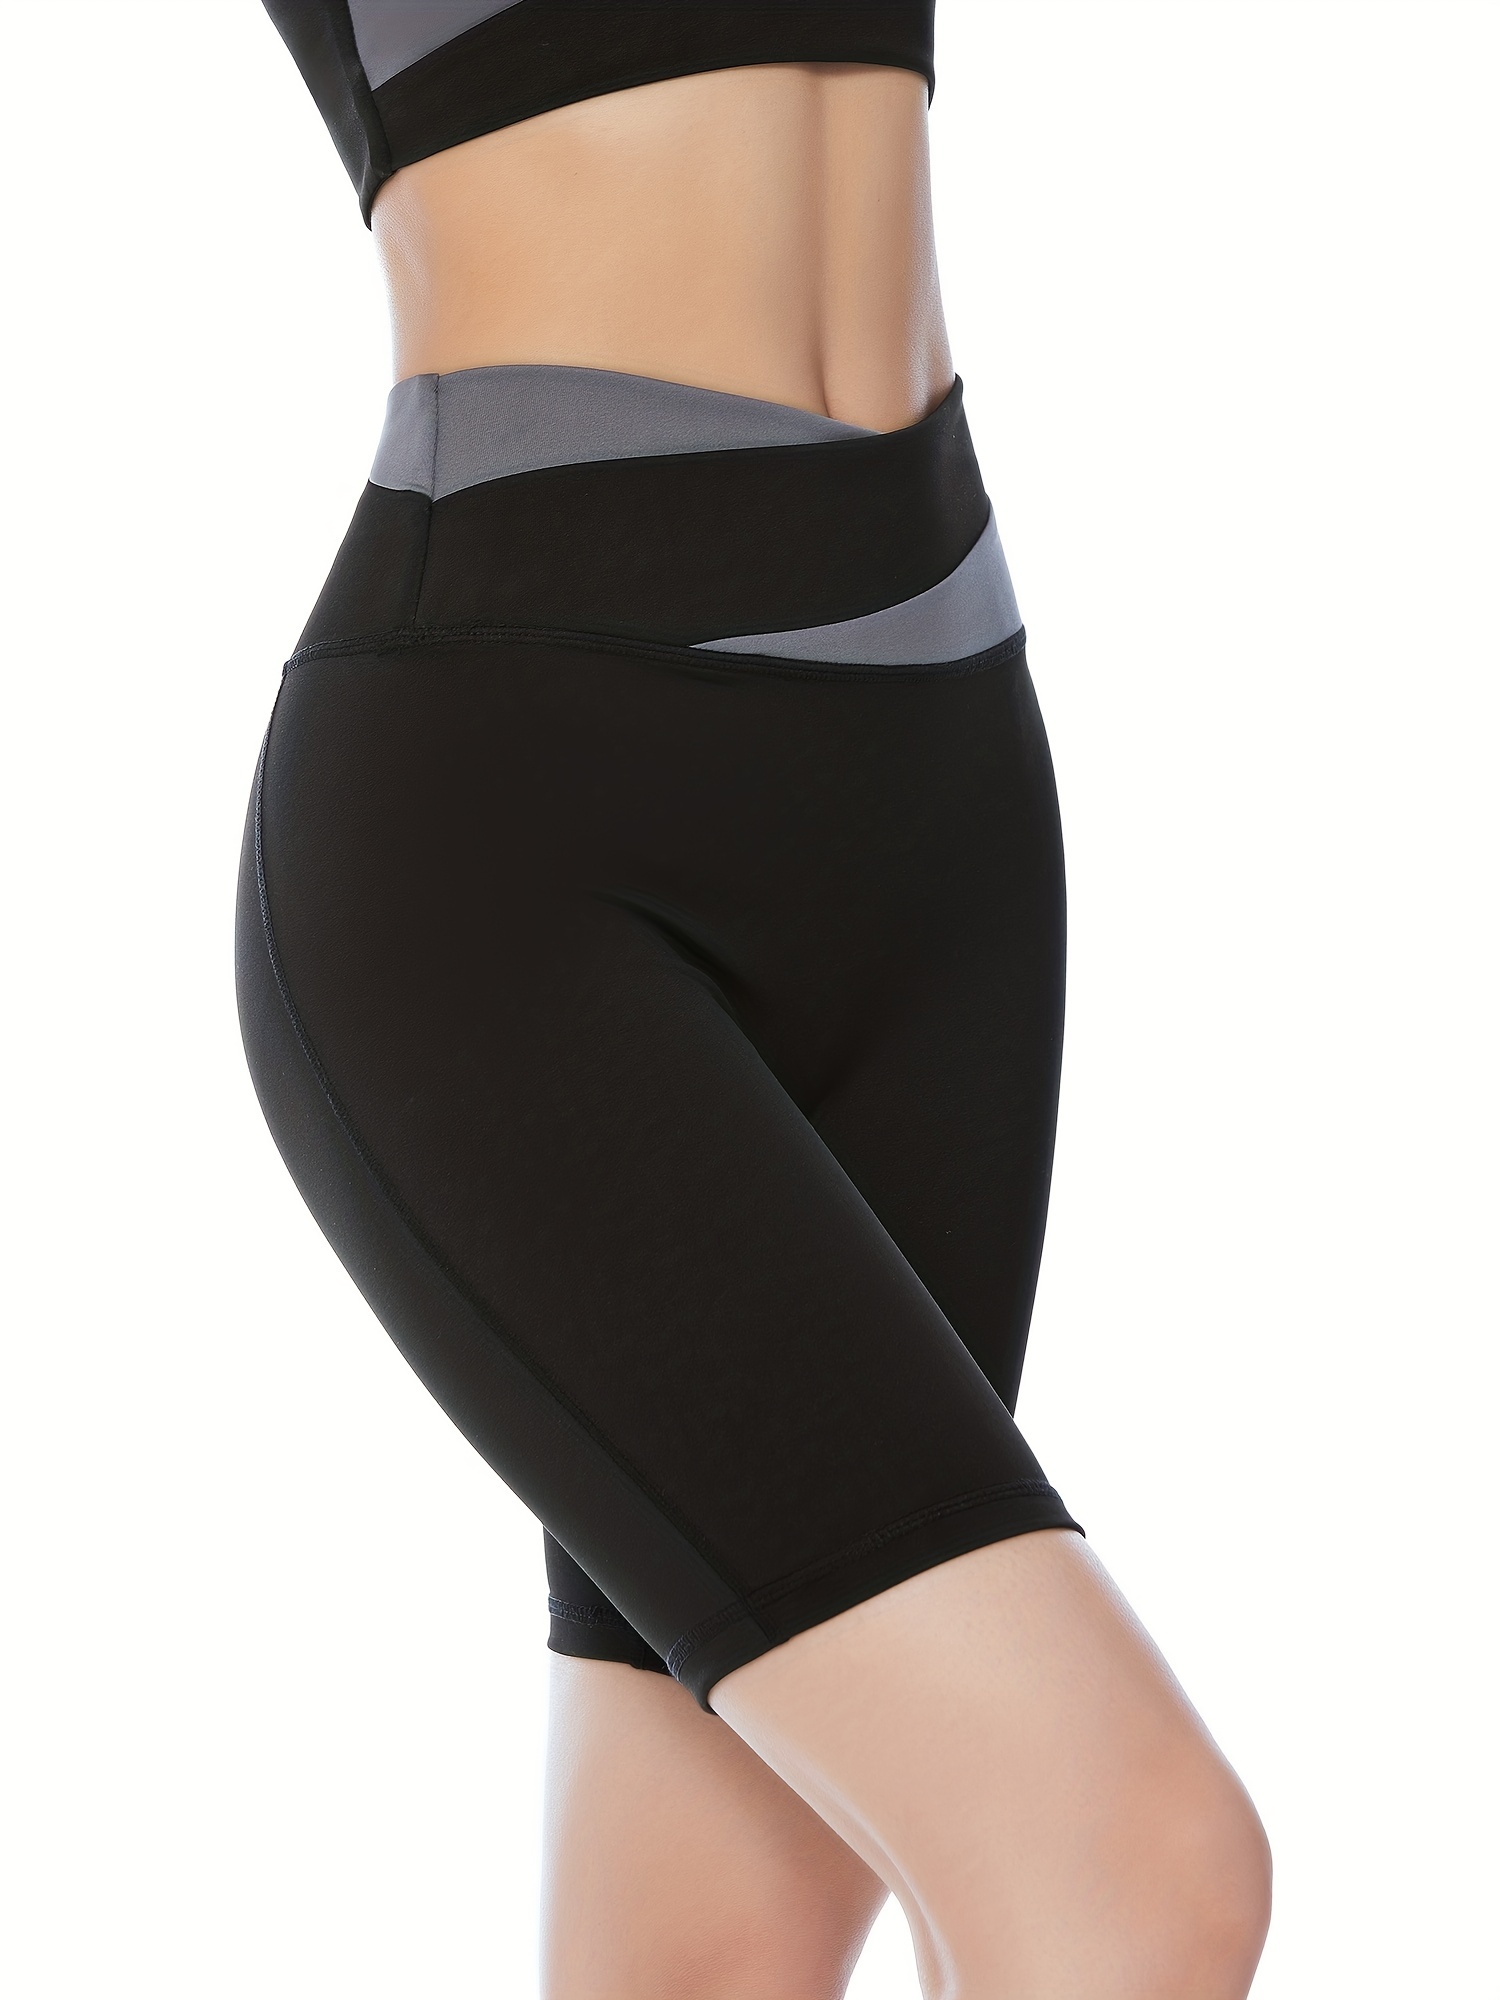 1PC Compression Yoga Pants In High Waist Athletic Pants Tummy